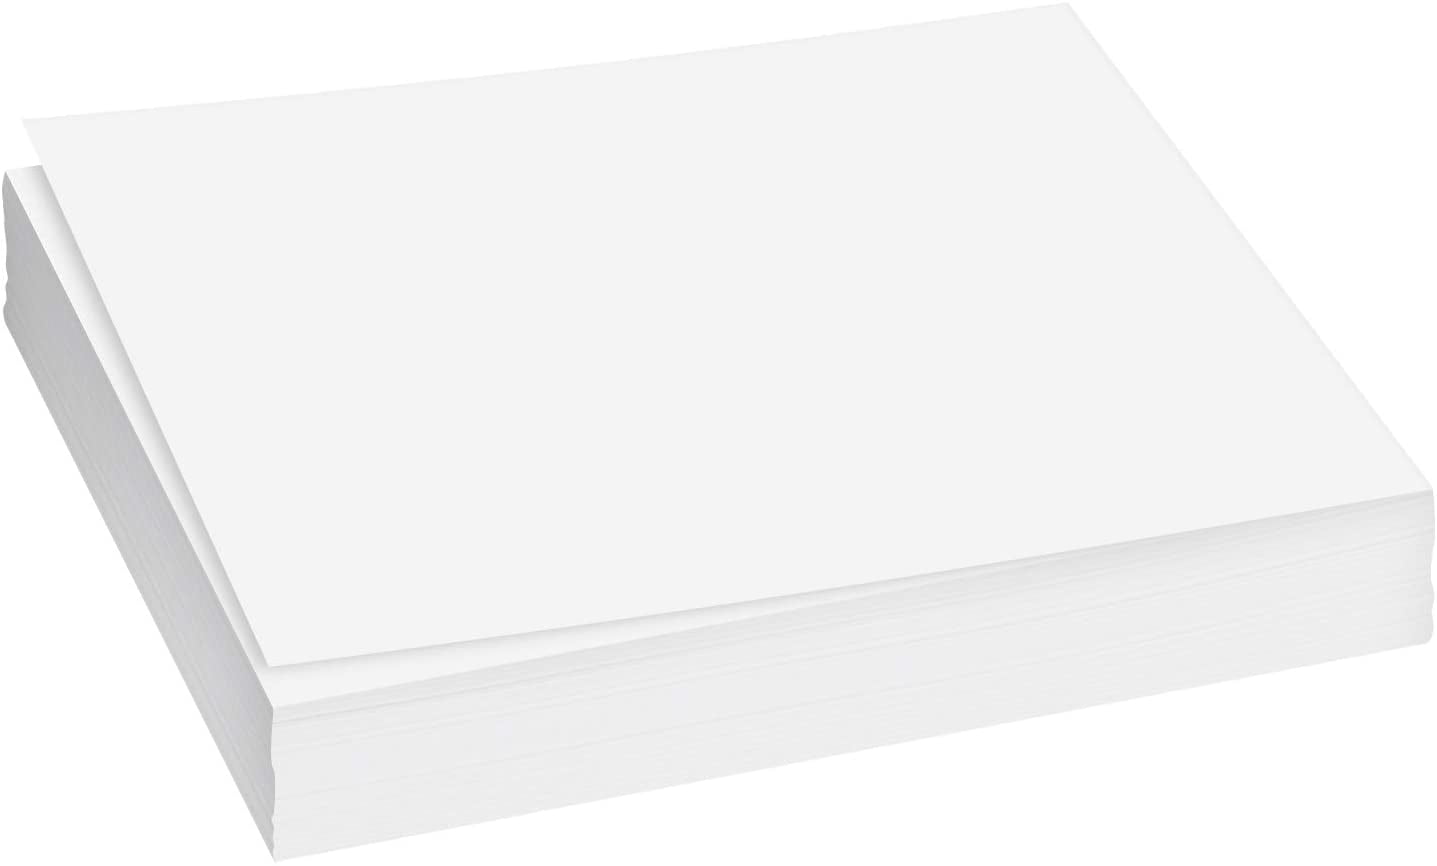 A4 White Paper | For Copy, Printing, Writing | Pack of 500 sheets